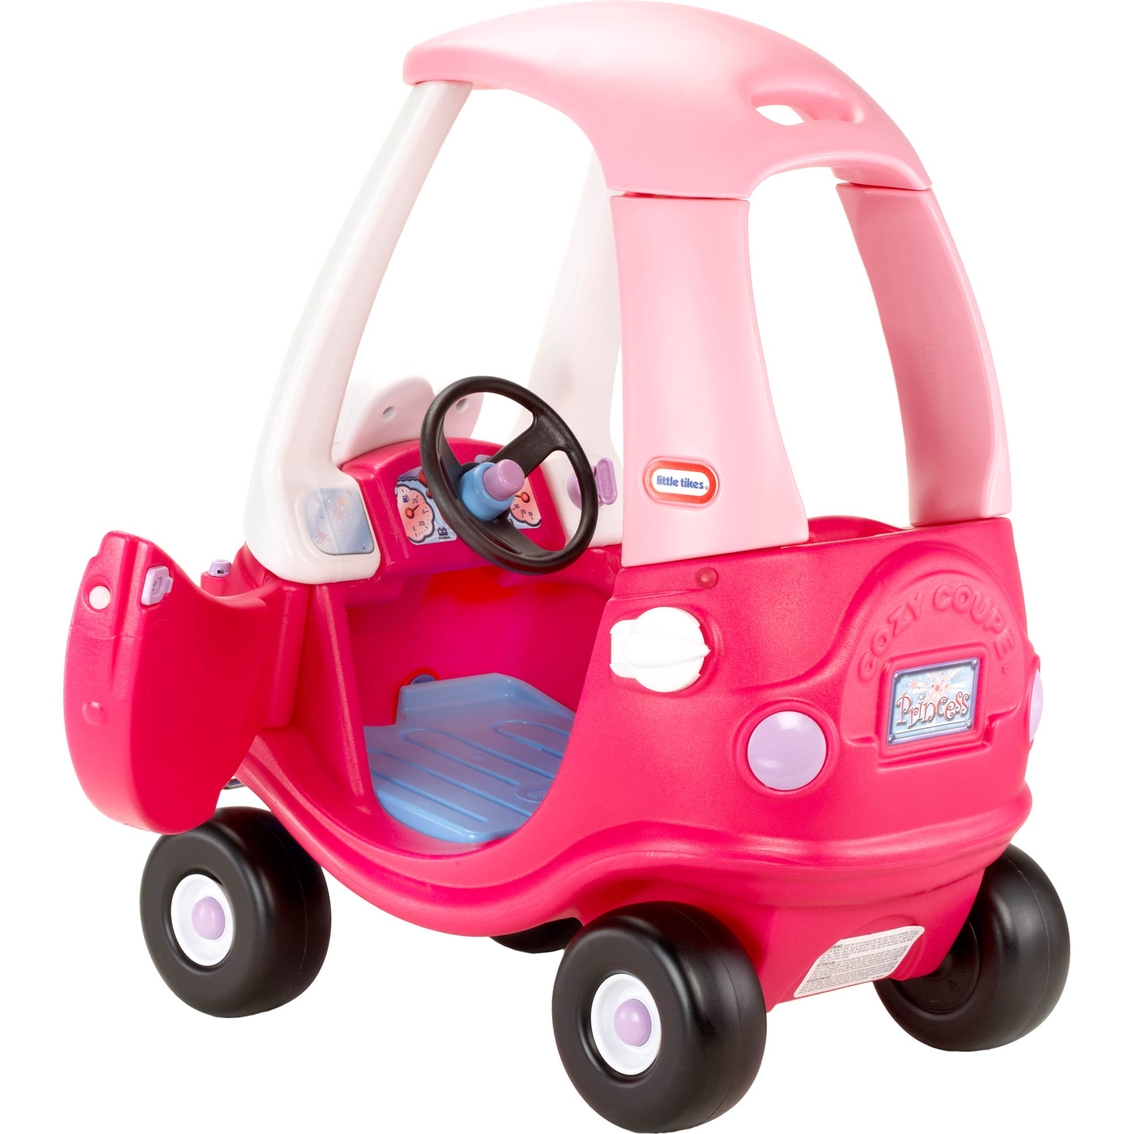 Little Tikes Princess Cozy Coupe - Image 2 of 3